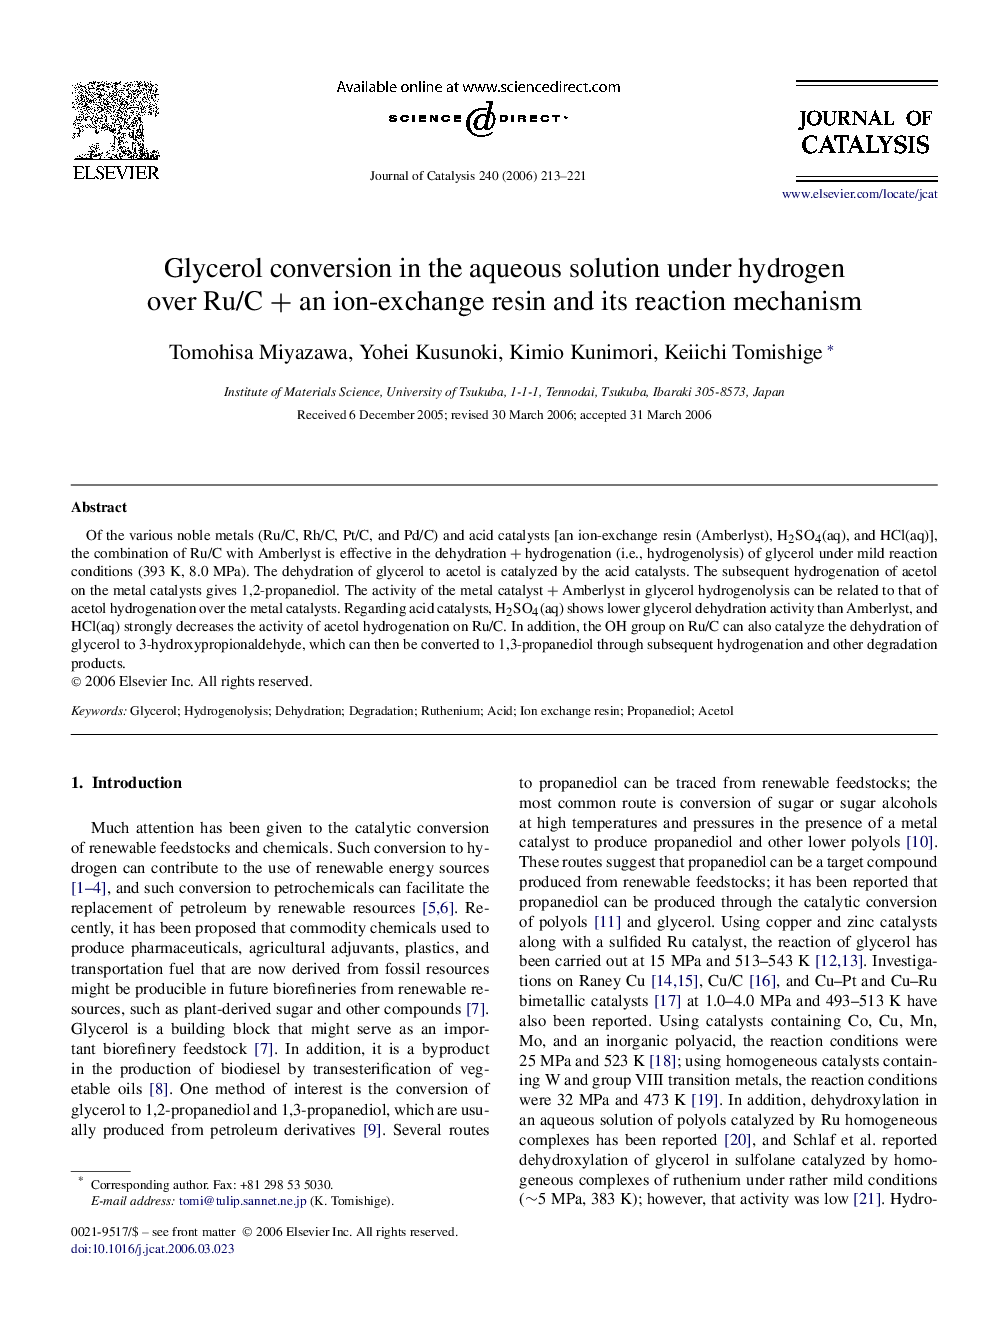 Glycerol conversion in the aqueous solution under hydrogen over Ru/C + an ion-exchange resin and its reaction mechanism